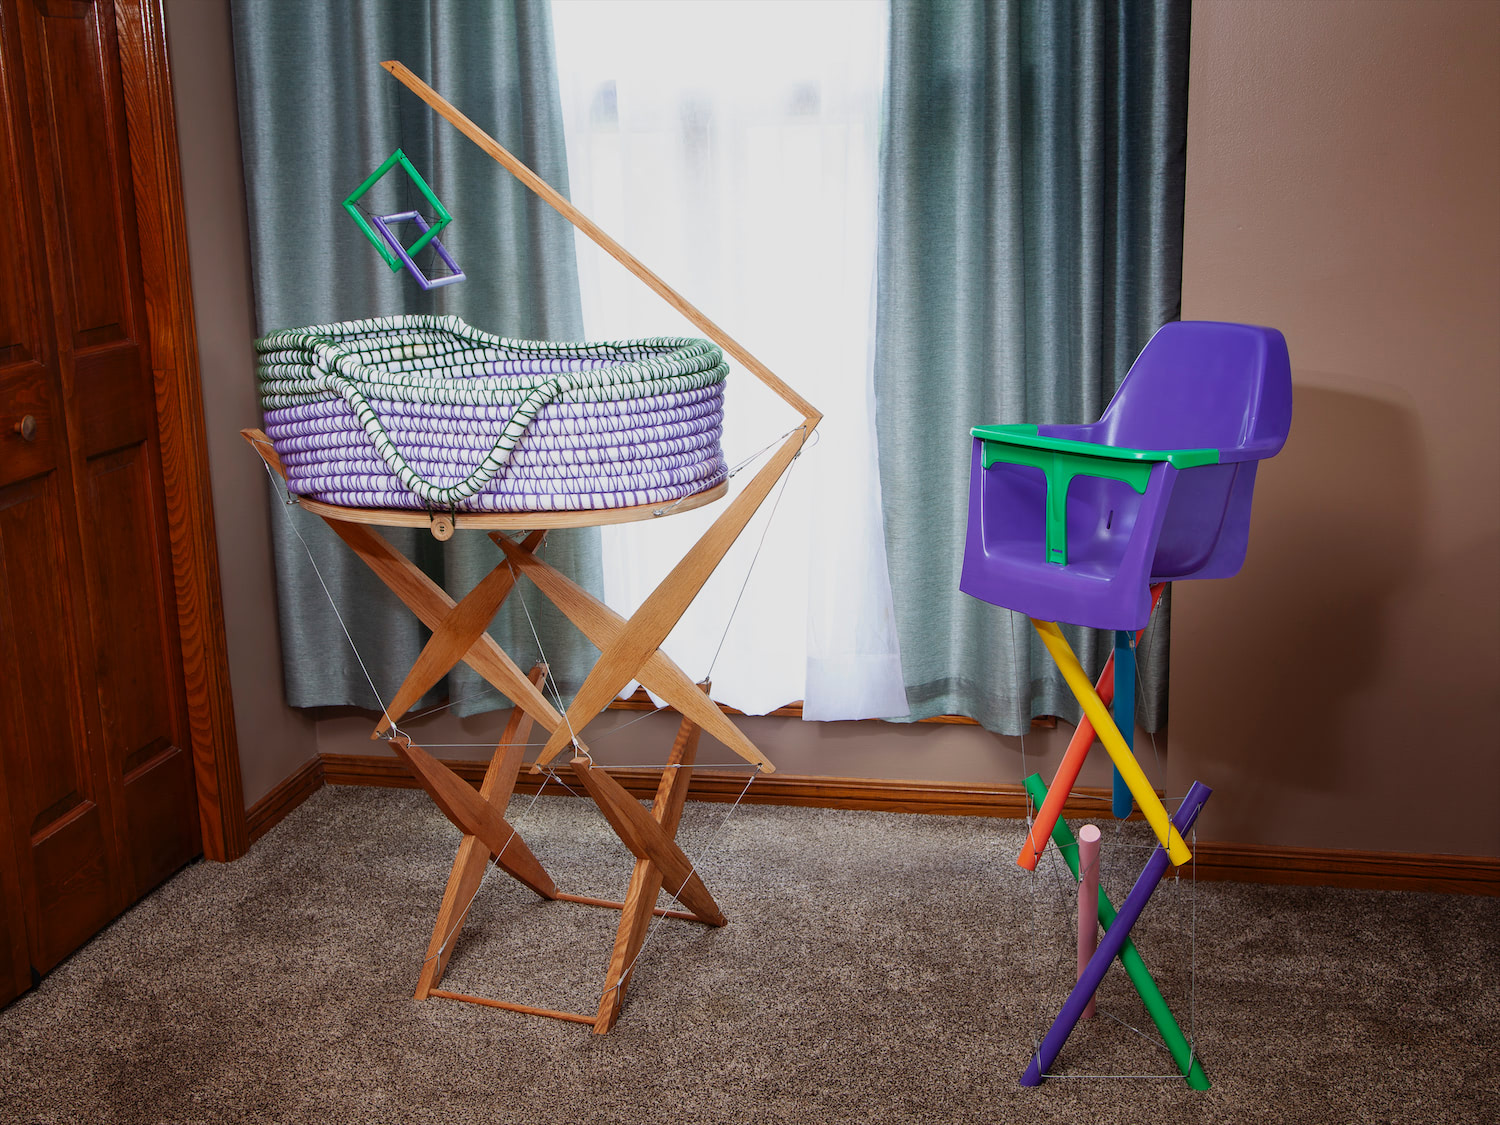 Tensegrity bassinet on a wood structure with a hanging tensegrity mobile and hand crocheted basket. Tensegrity high chair with six painted legs, three of which are completely suspended. Side by side in a bedroom.